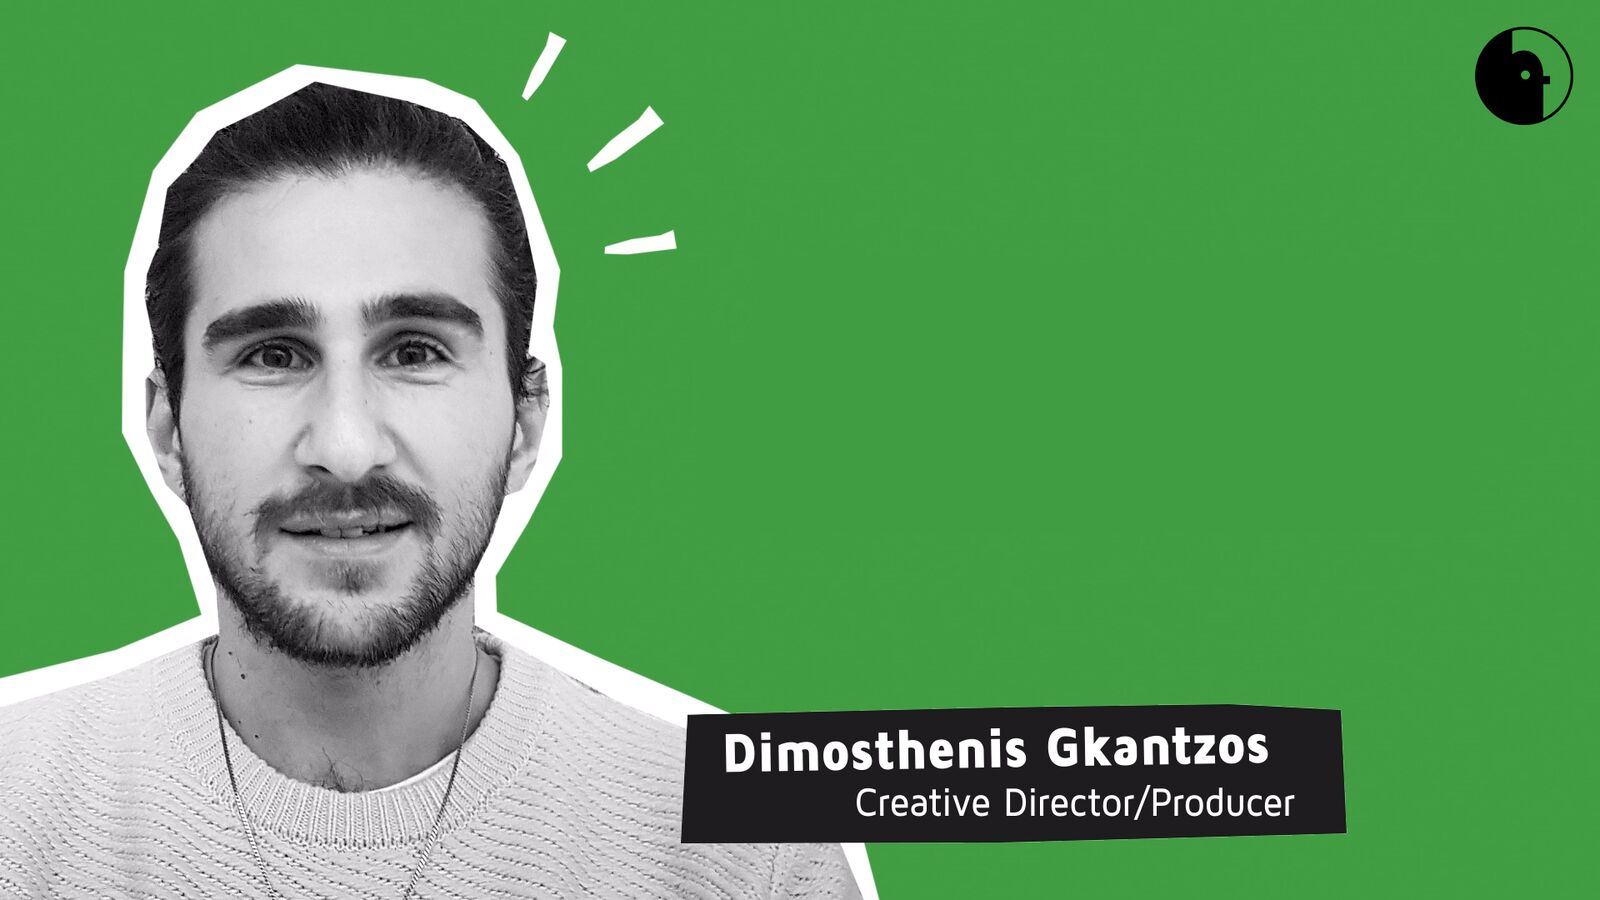 4 Questions with Dimosthenis Gkantzos